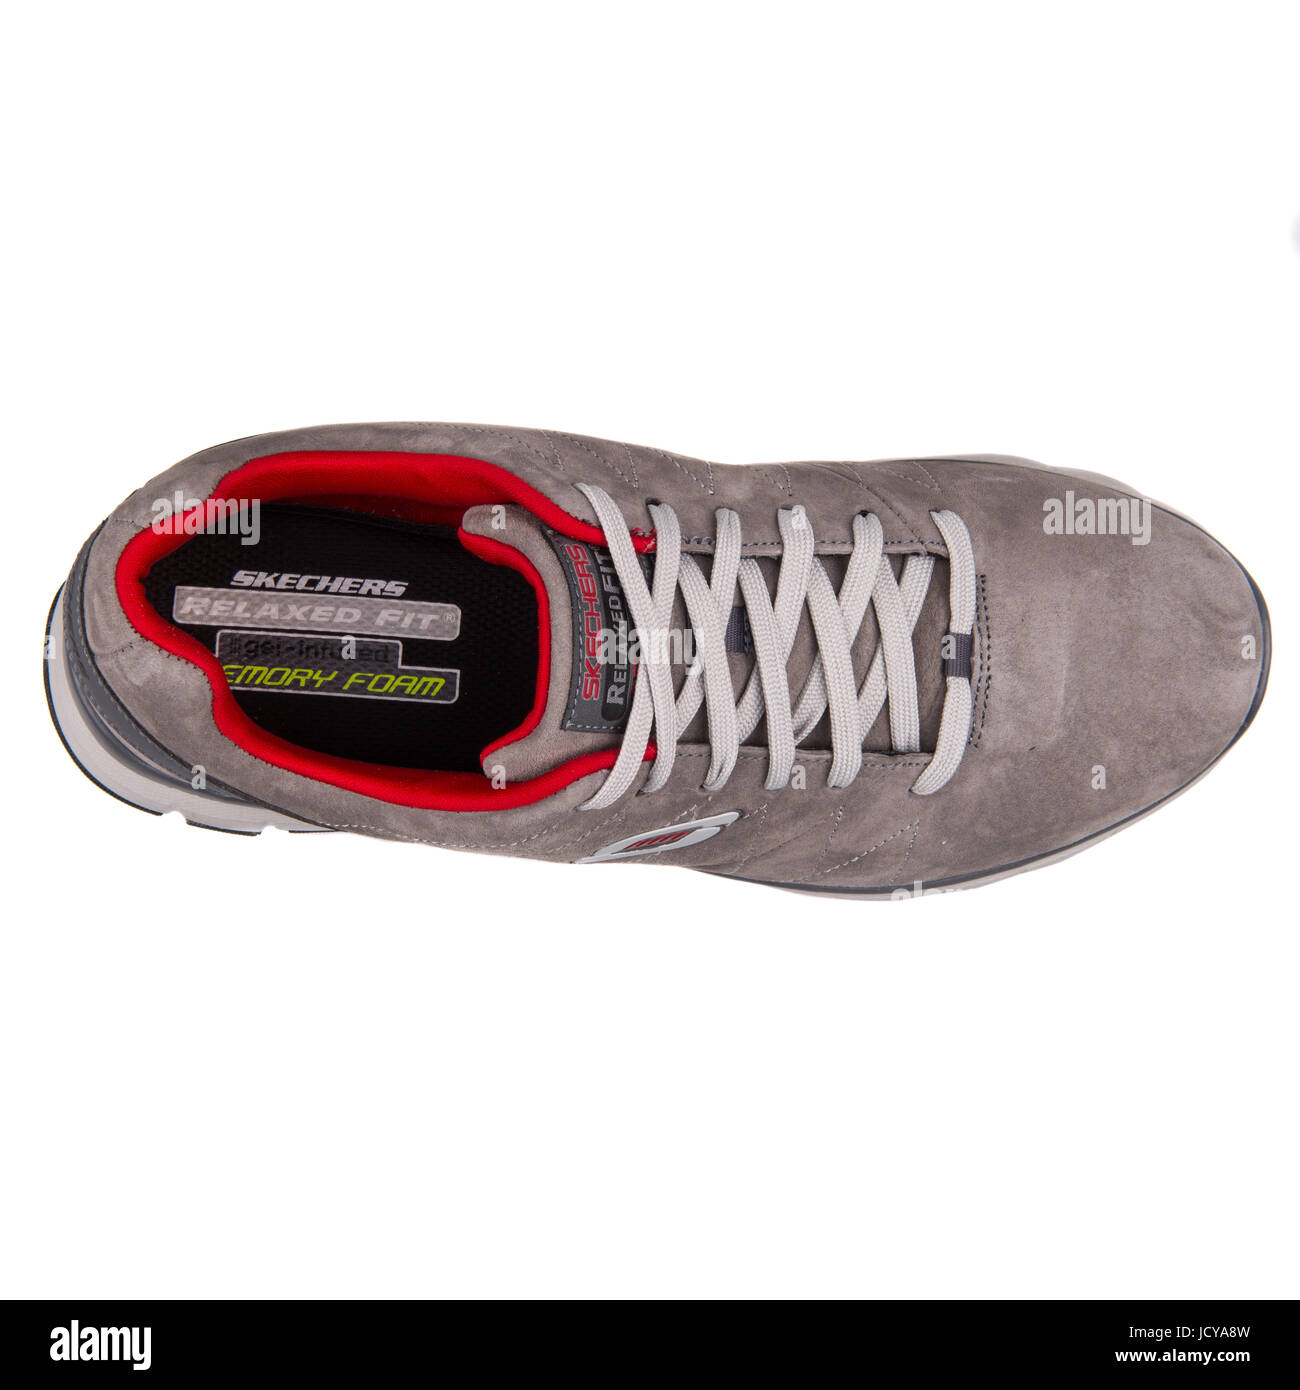 Skechers Natural Vigor Charcoal and Red Men's Running Shoes - 999668-CCRD  Stock Photo - Alamy